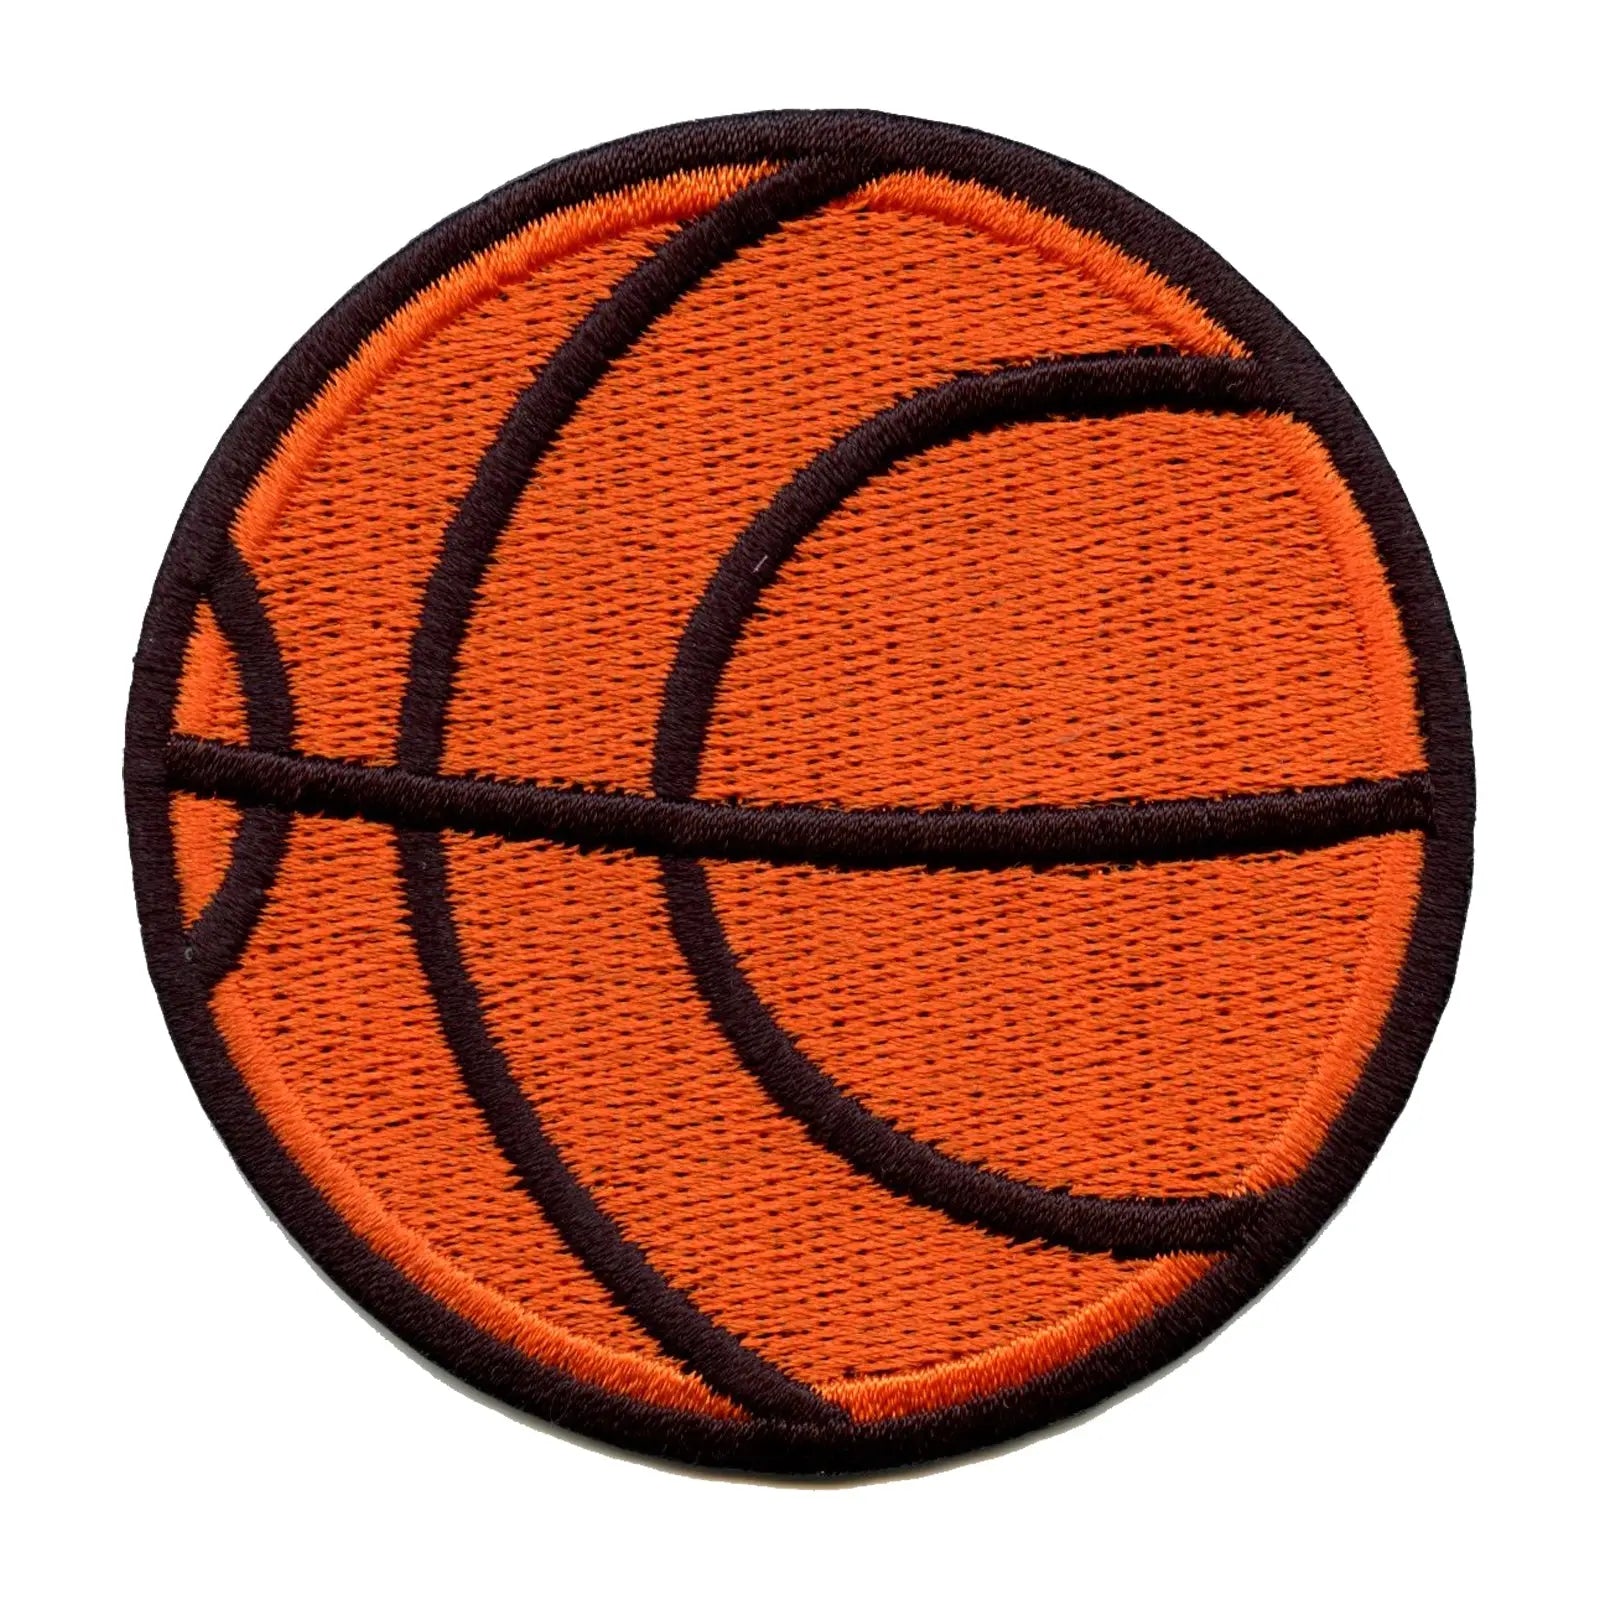  Squad Basketball Team Patch Logo Embroidered Iron On